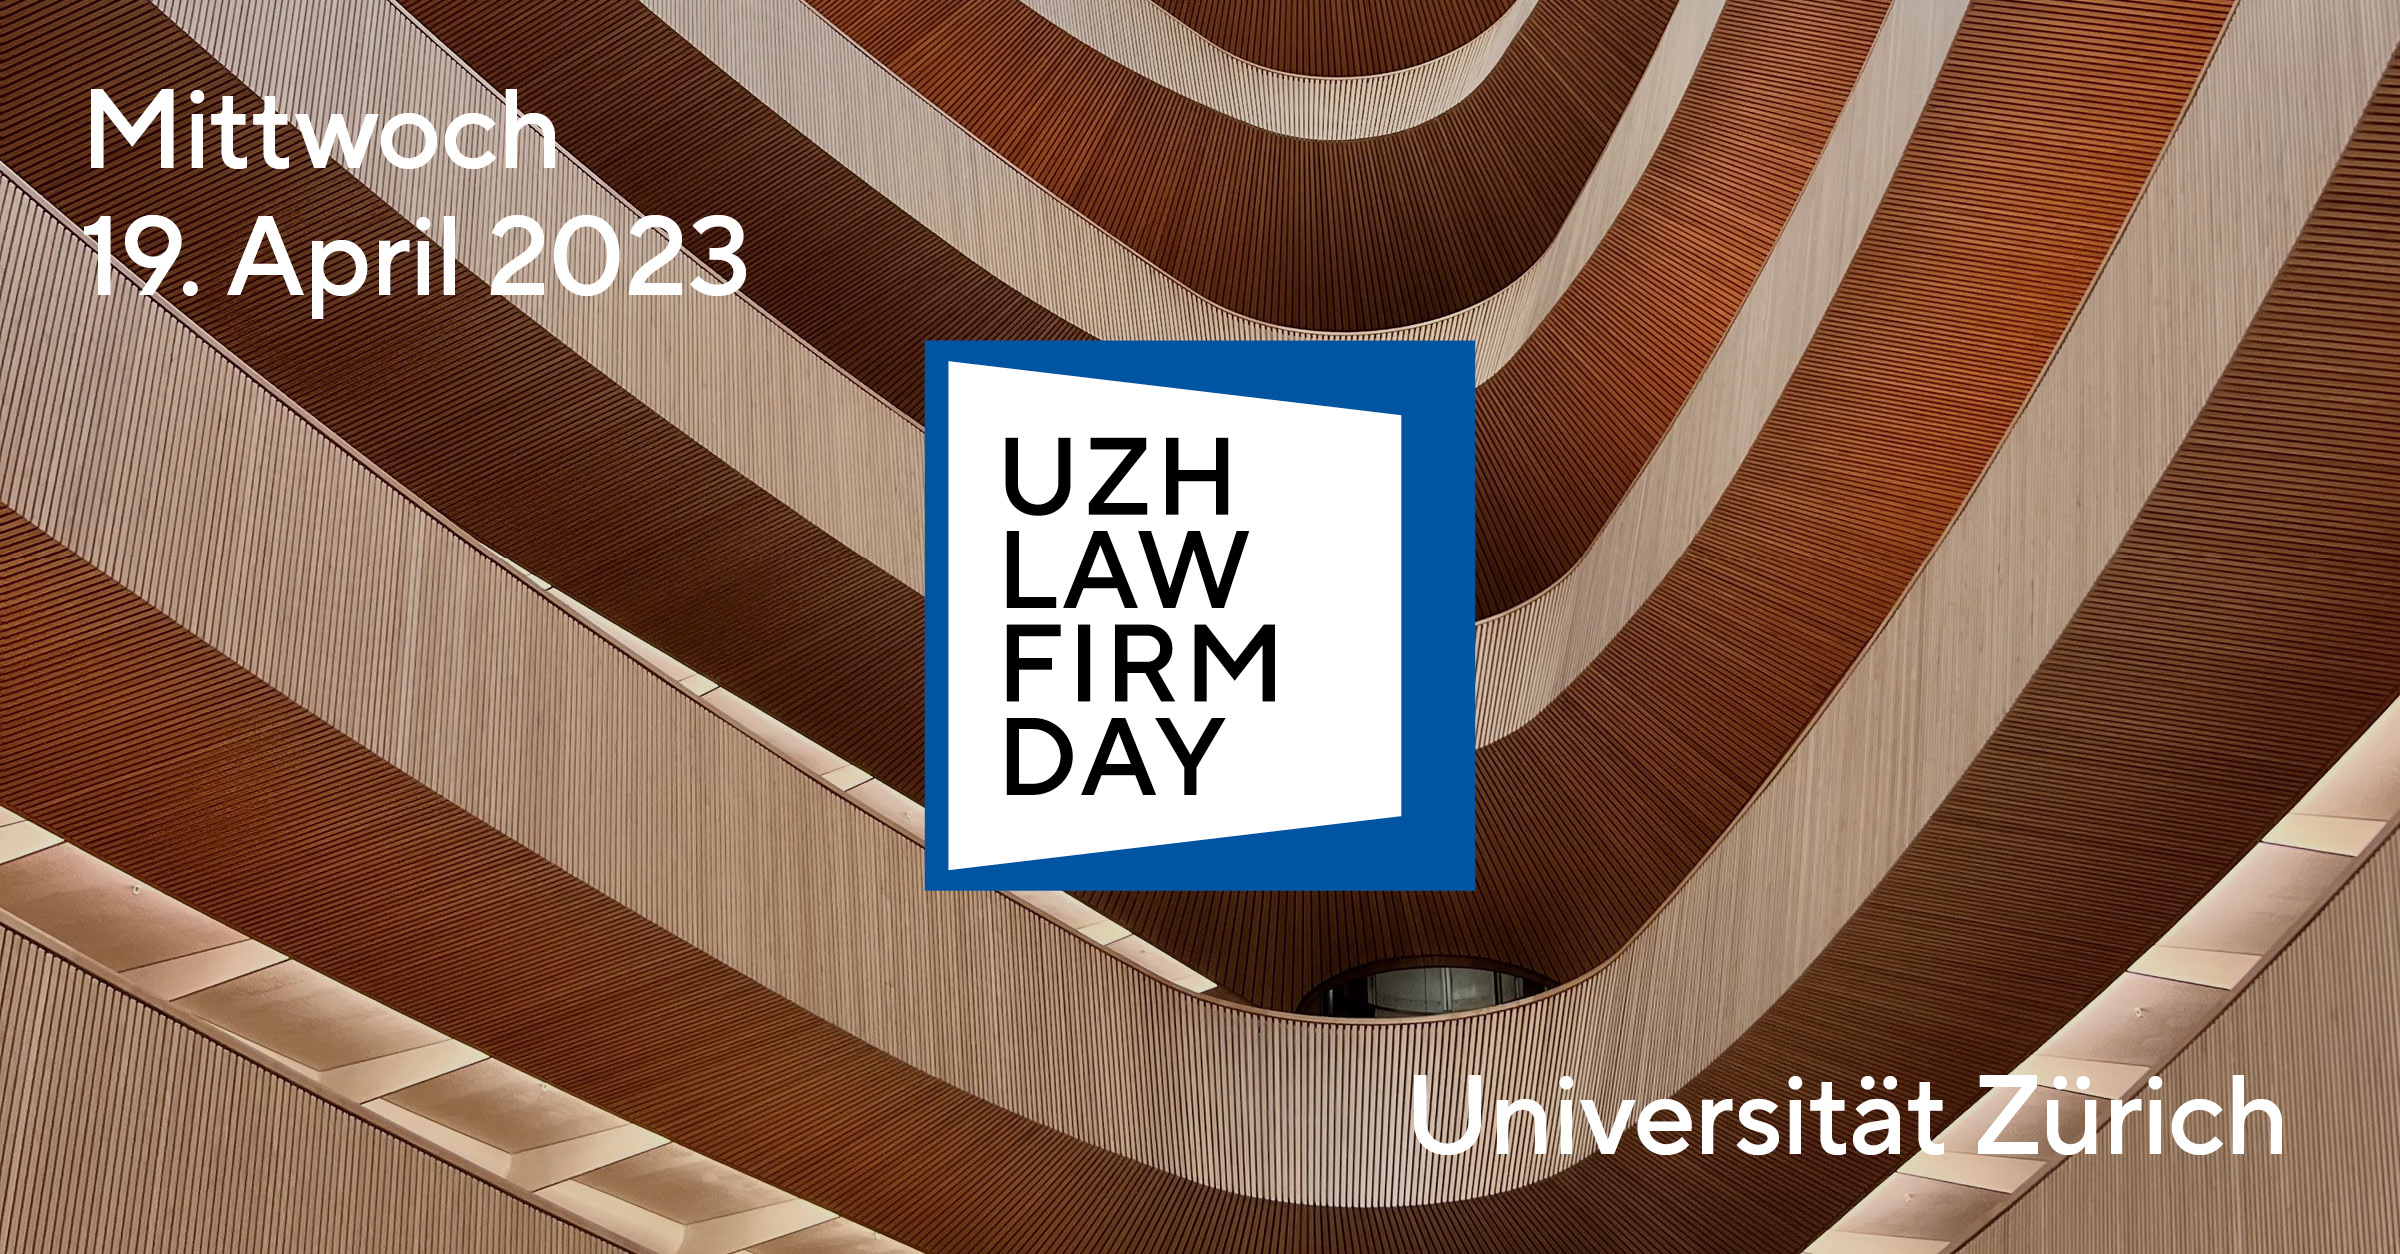 UZH Law Firm Day